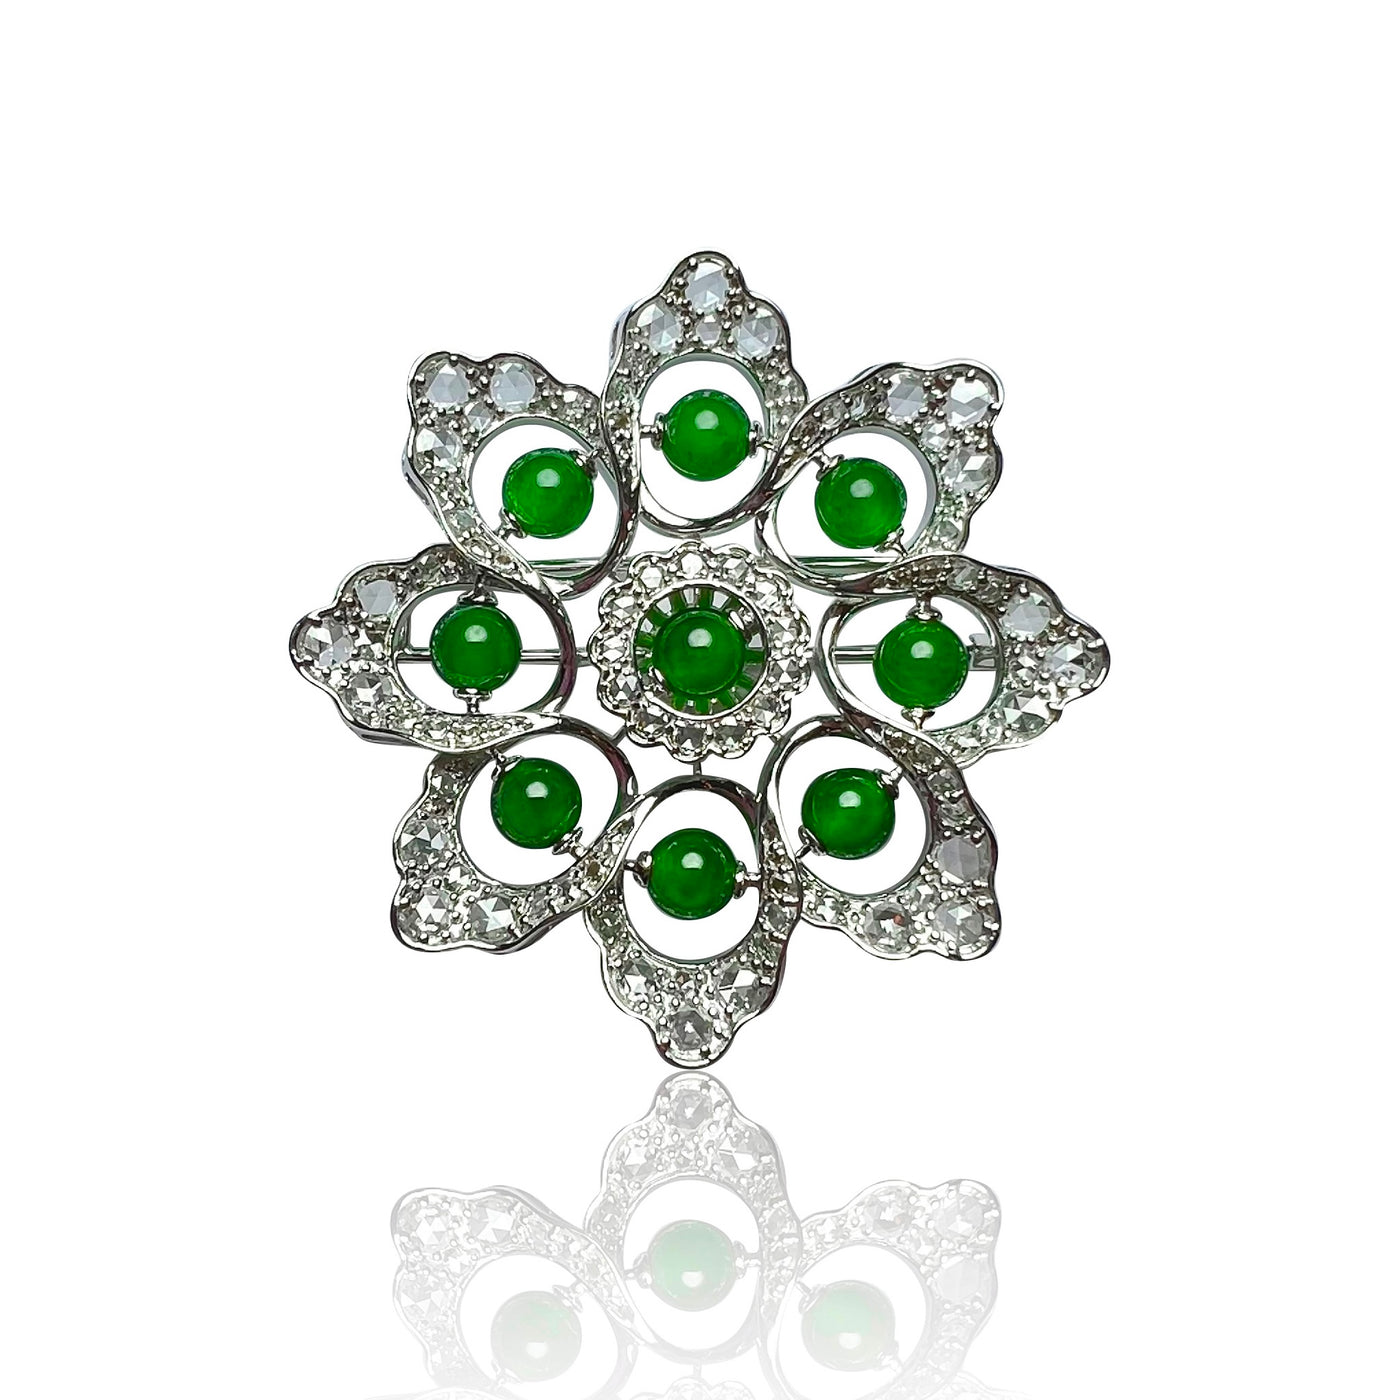 QUEEN OF THE NIGHT JADEITE BROOCH IN 18K WHITE GOLD WITH DIAMONDS